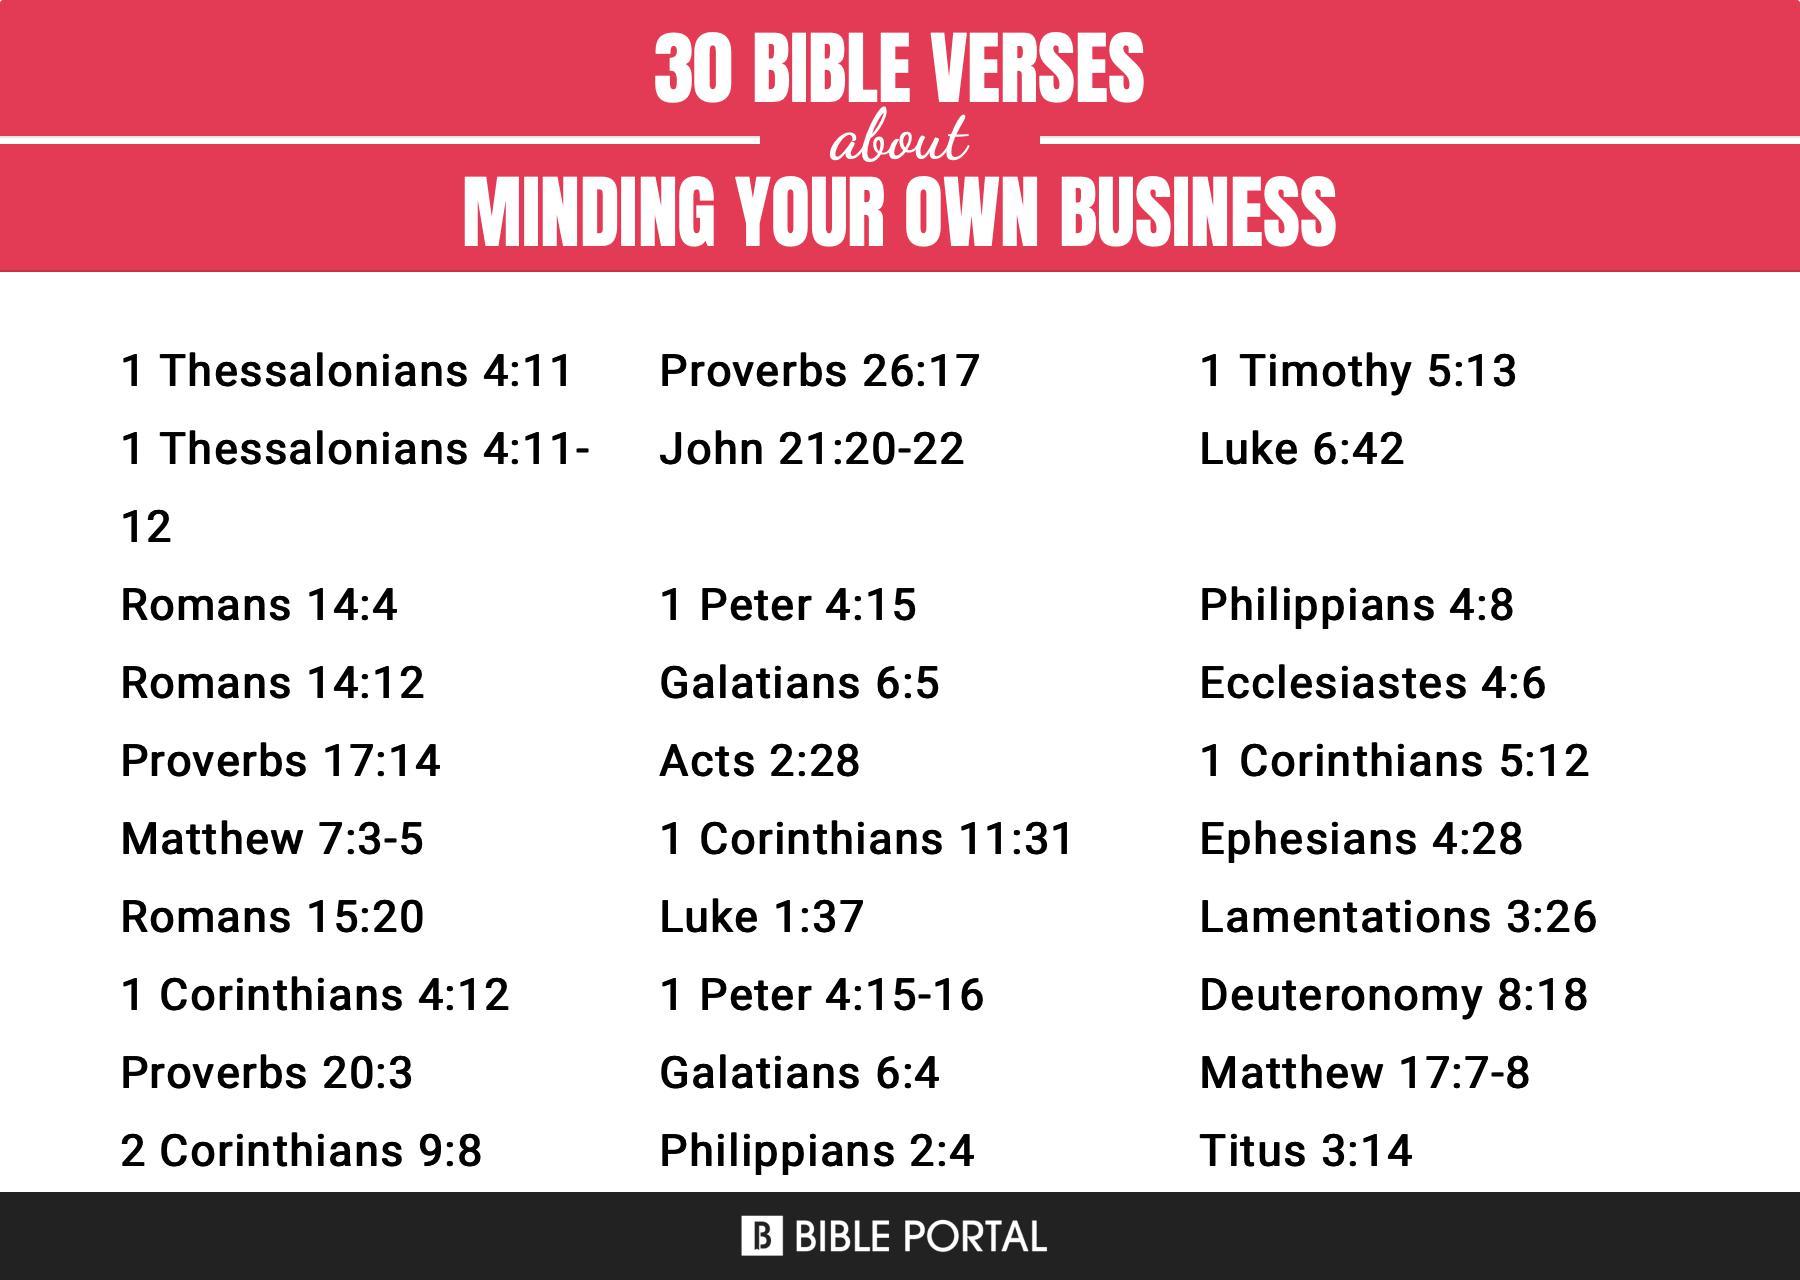 What Does the Bible Say about Minding Your Own Business?